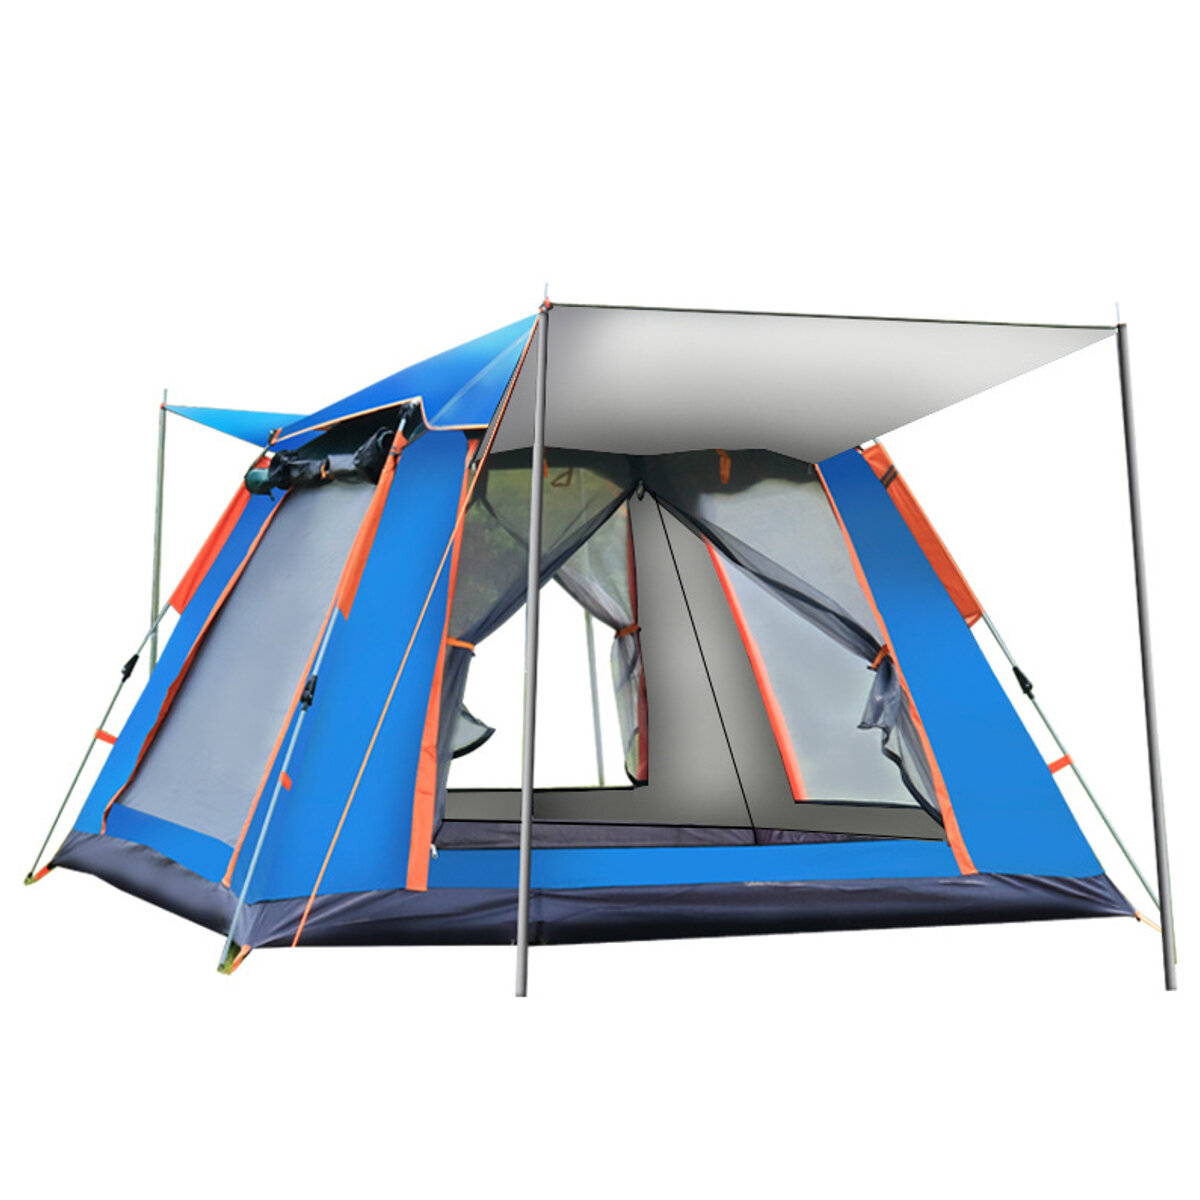 Image of 4-5 People Fully Automatic Set-up Tent UV Protected Family Picnic Travel Sun Shelters Outdoor Rainproof Windproof Campin